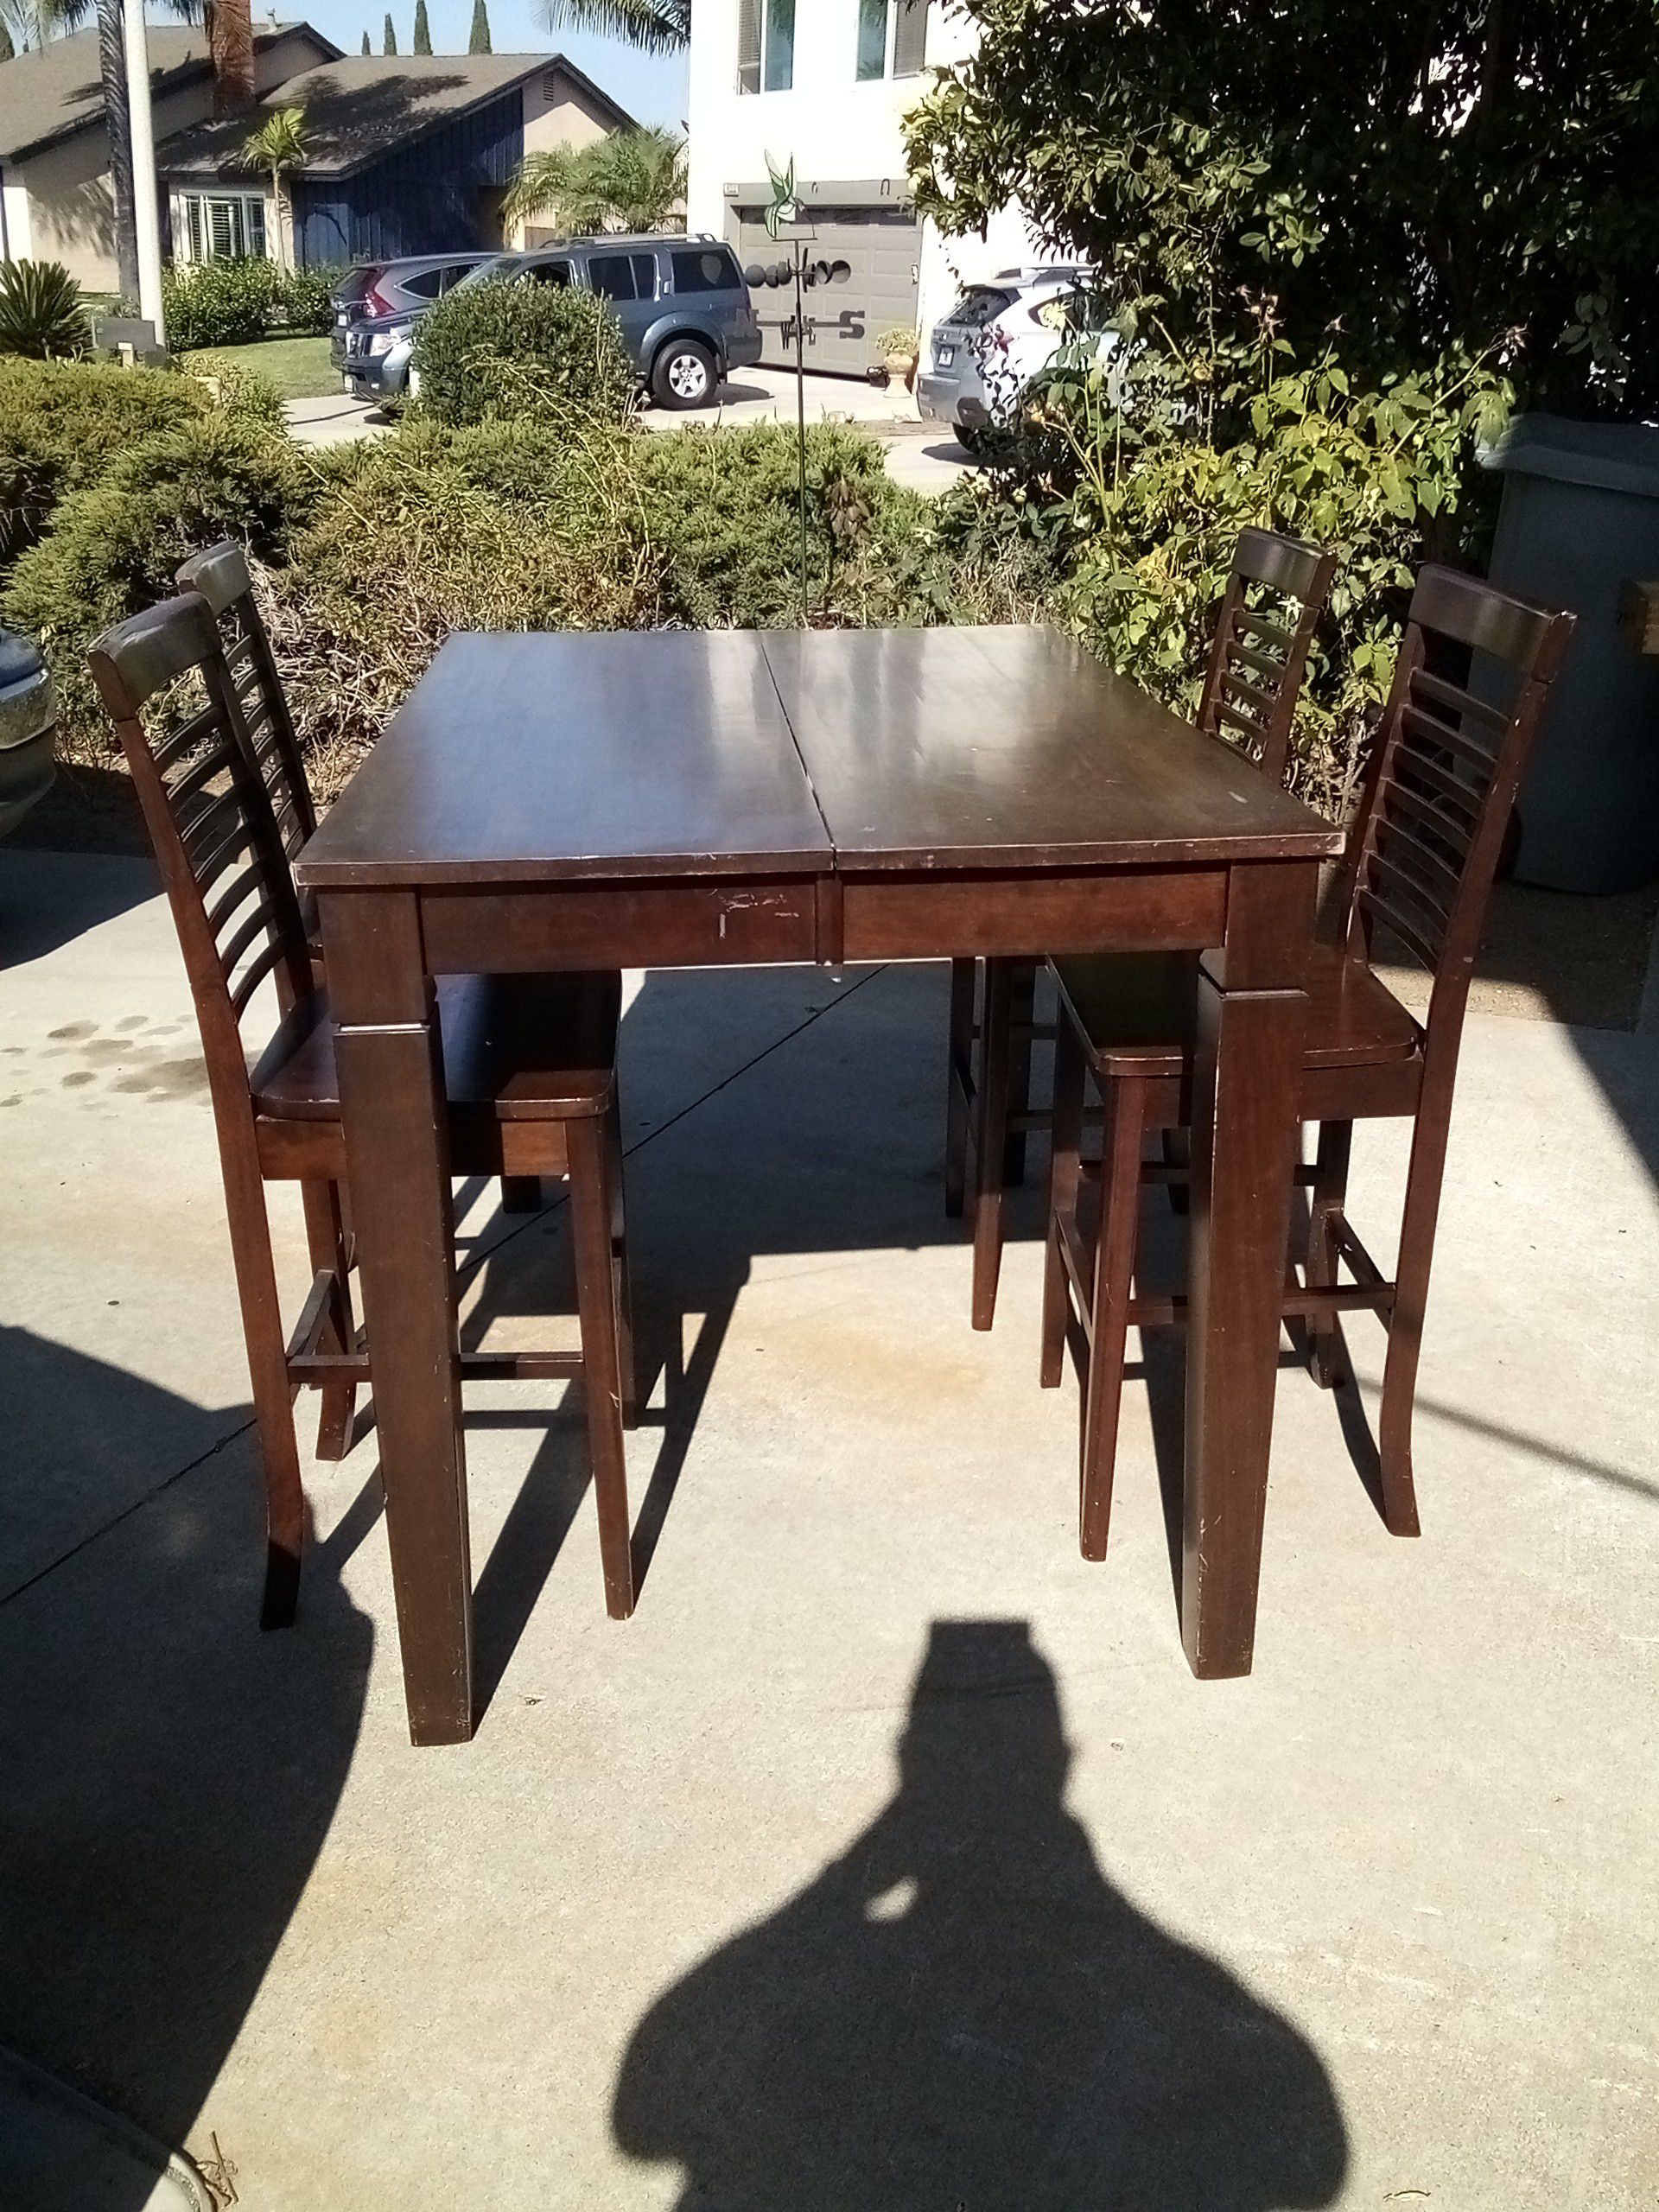 Dinning table 3ft wide x 4ft long x 3ft tall kitchen table. 4 chair's. Has an 18 inch wide leaf (rarely used). O.B.O